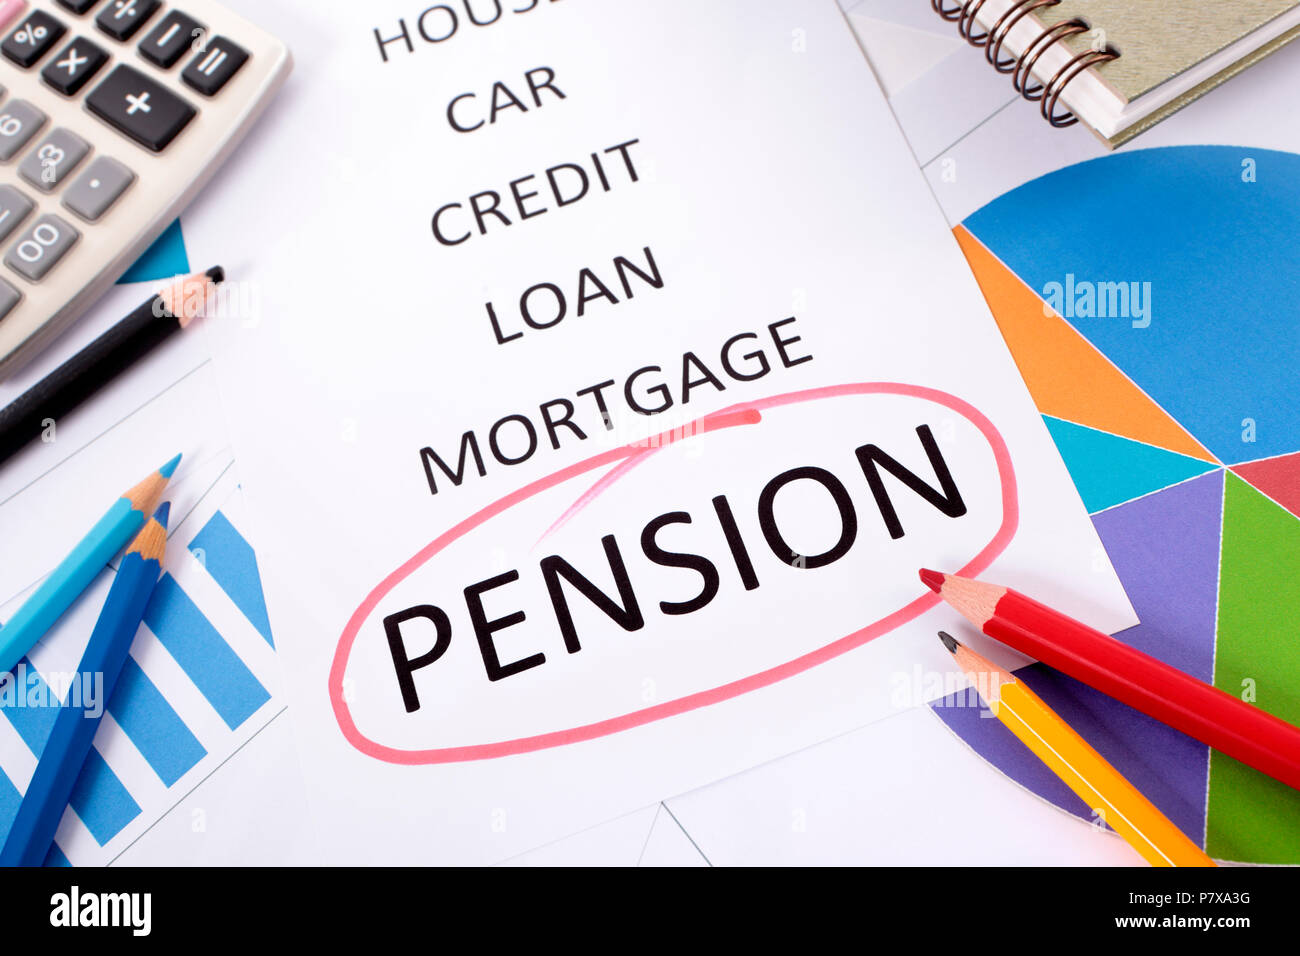 The word Pension circled in red with a list of saving and debt obligations surrounded by graphs, charts, books and pencils. Stock Photo